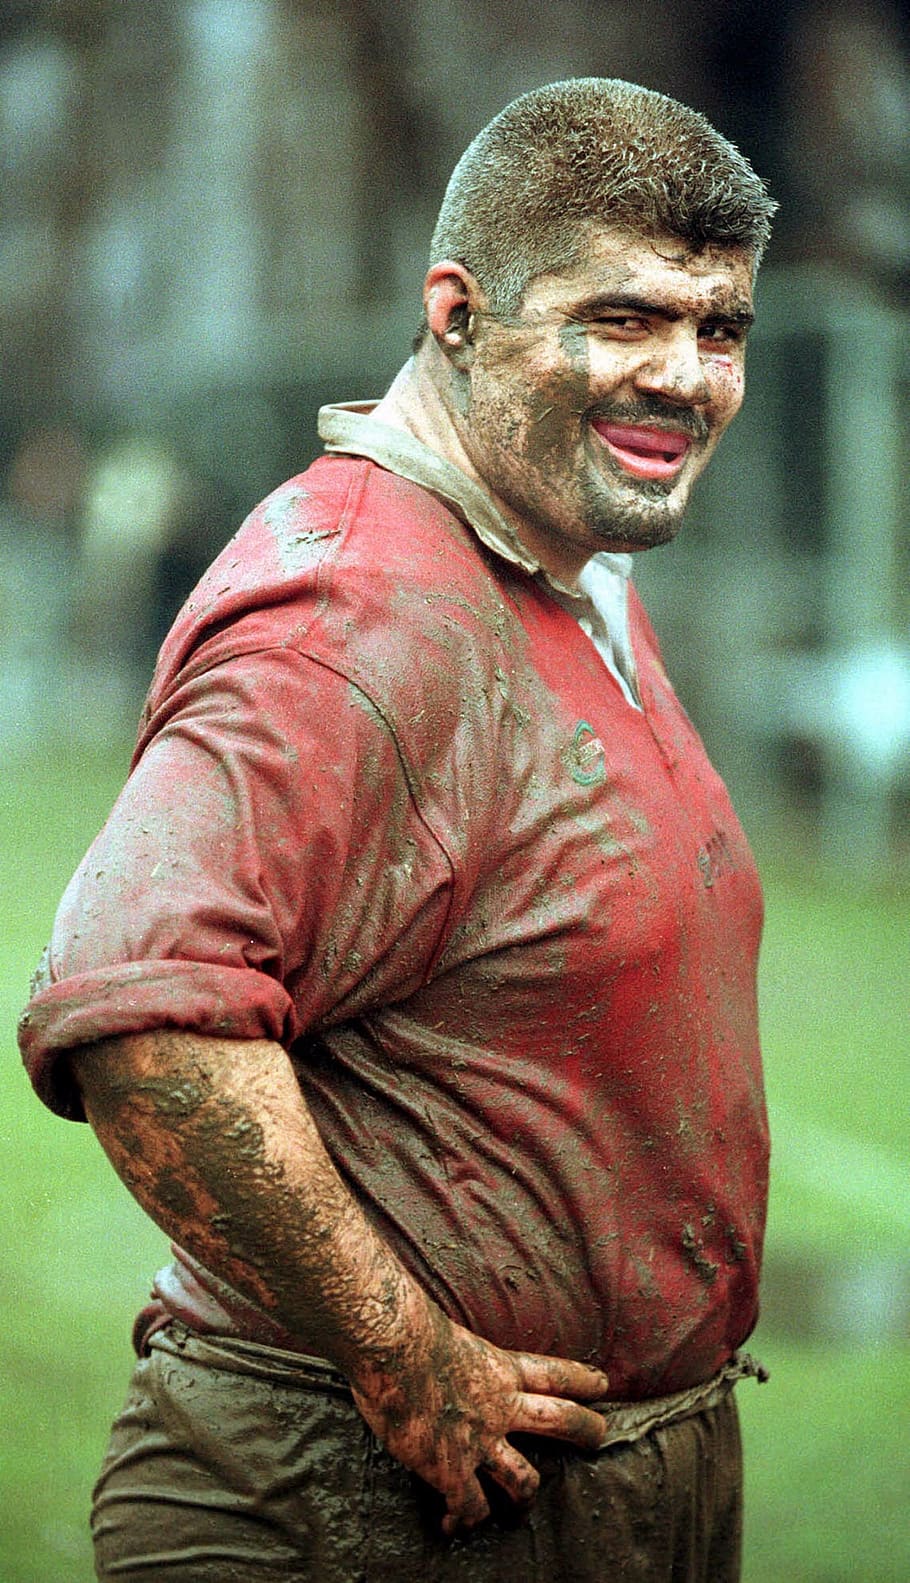 sport, rugby, humor, player, dirt, smile, game, comic, clay, mud